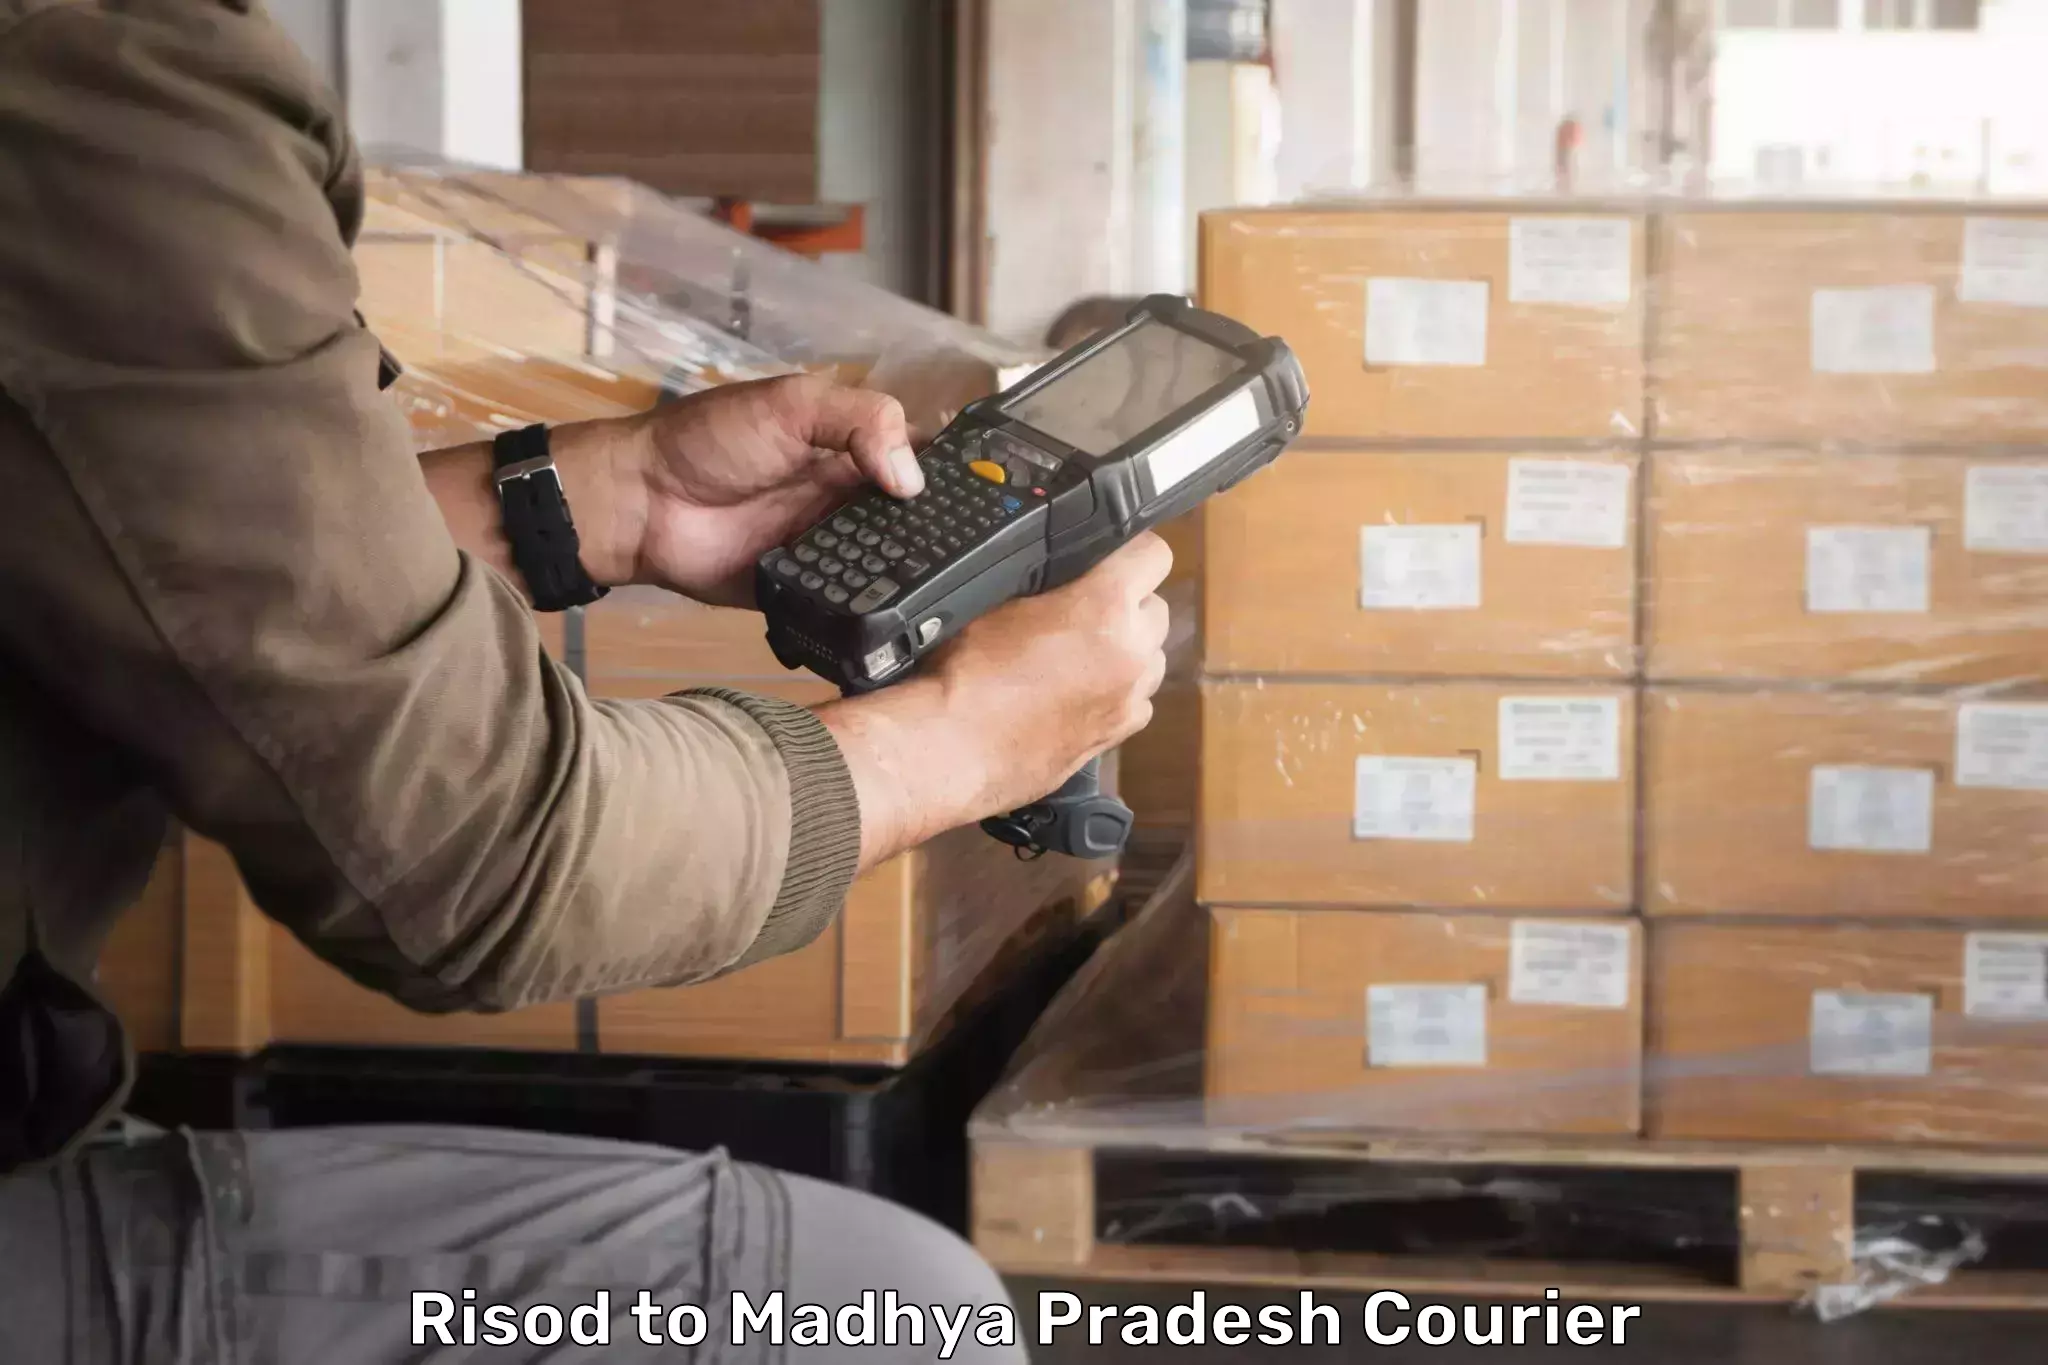 Premium courier solutions Risod to Jirapur